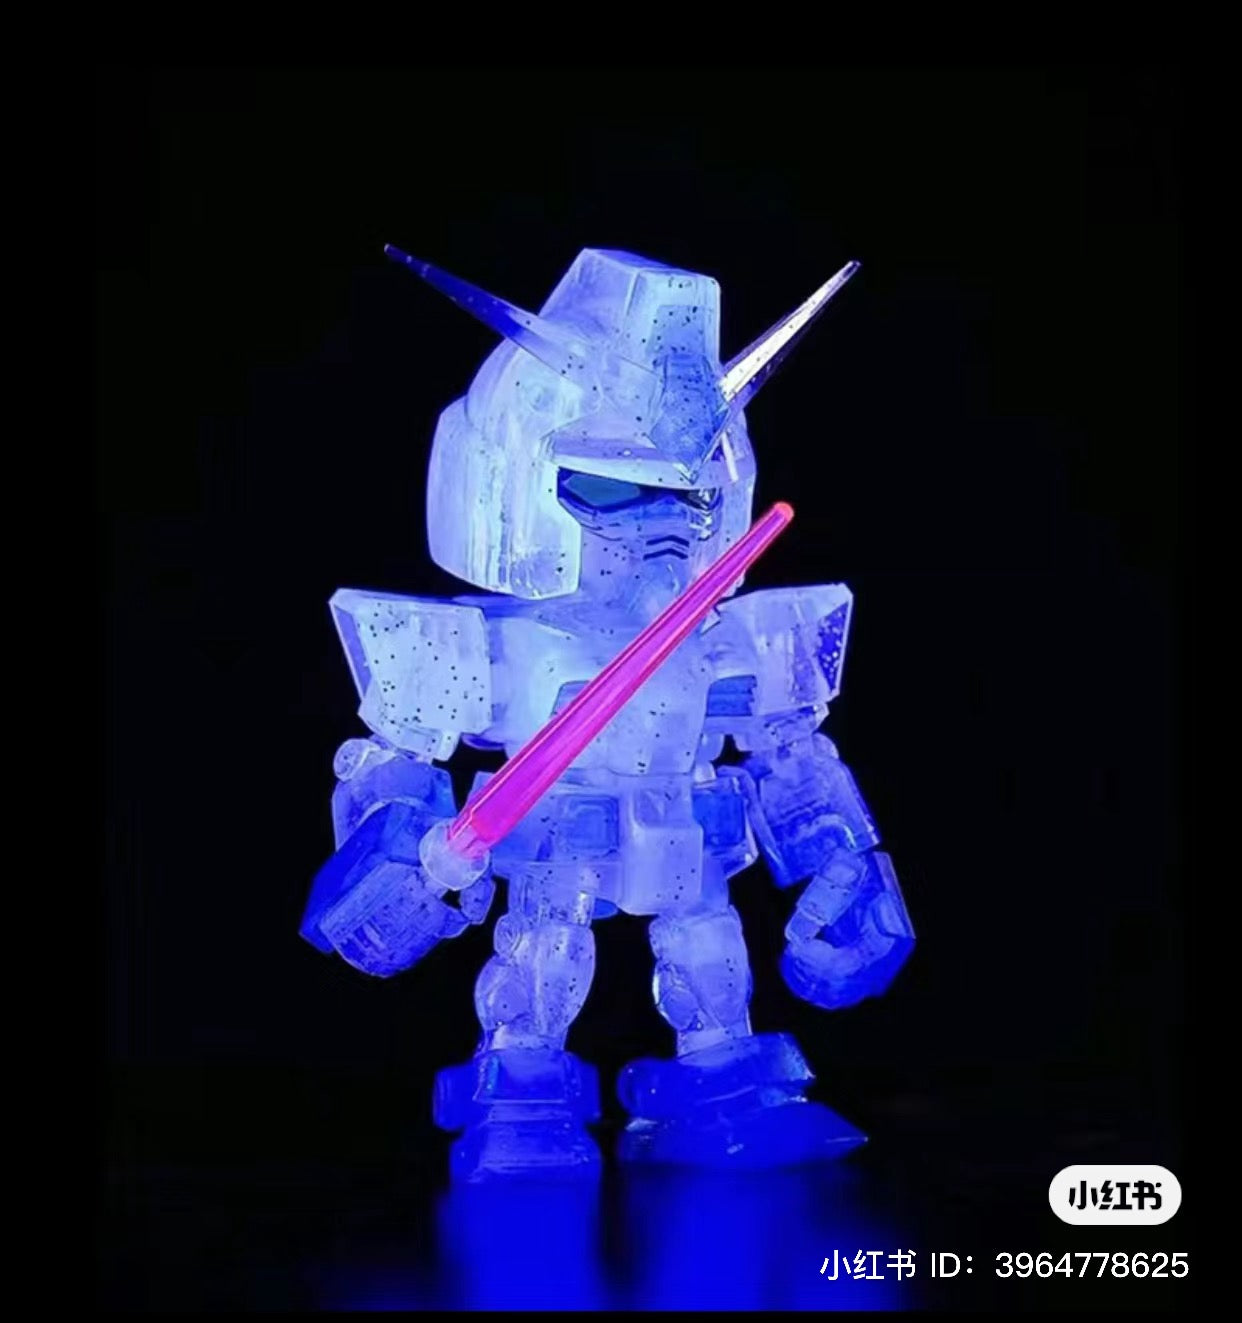 A blind box toy robot with a light saber from QMSV- MINI GUNDAM 2.0 series by Strangecat Toys. Preorder now for June 2024.